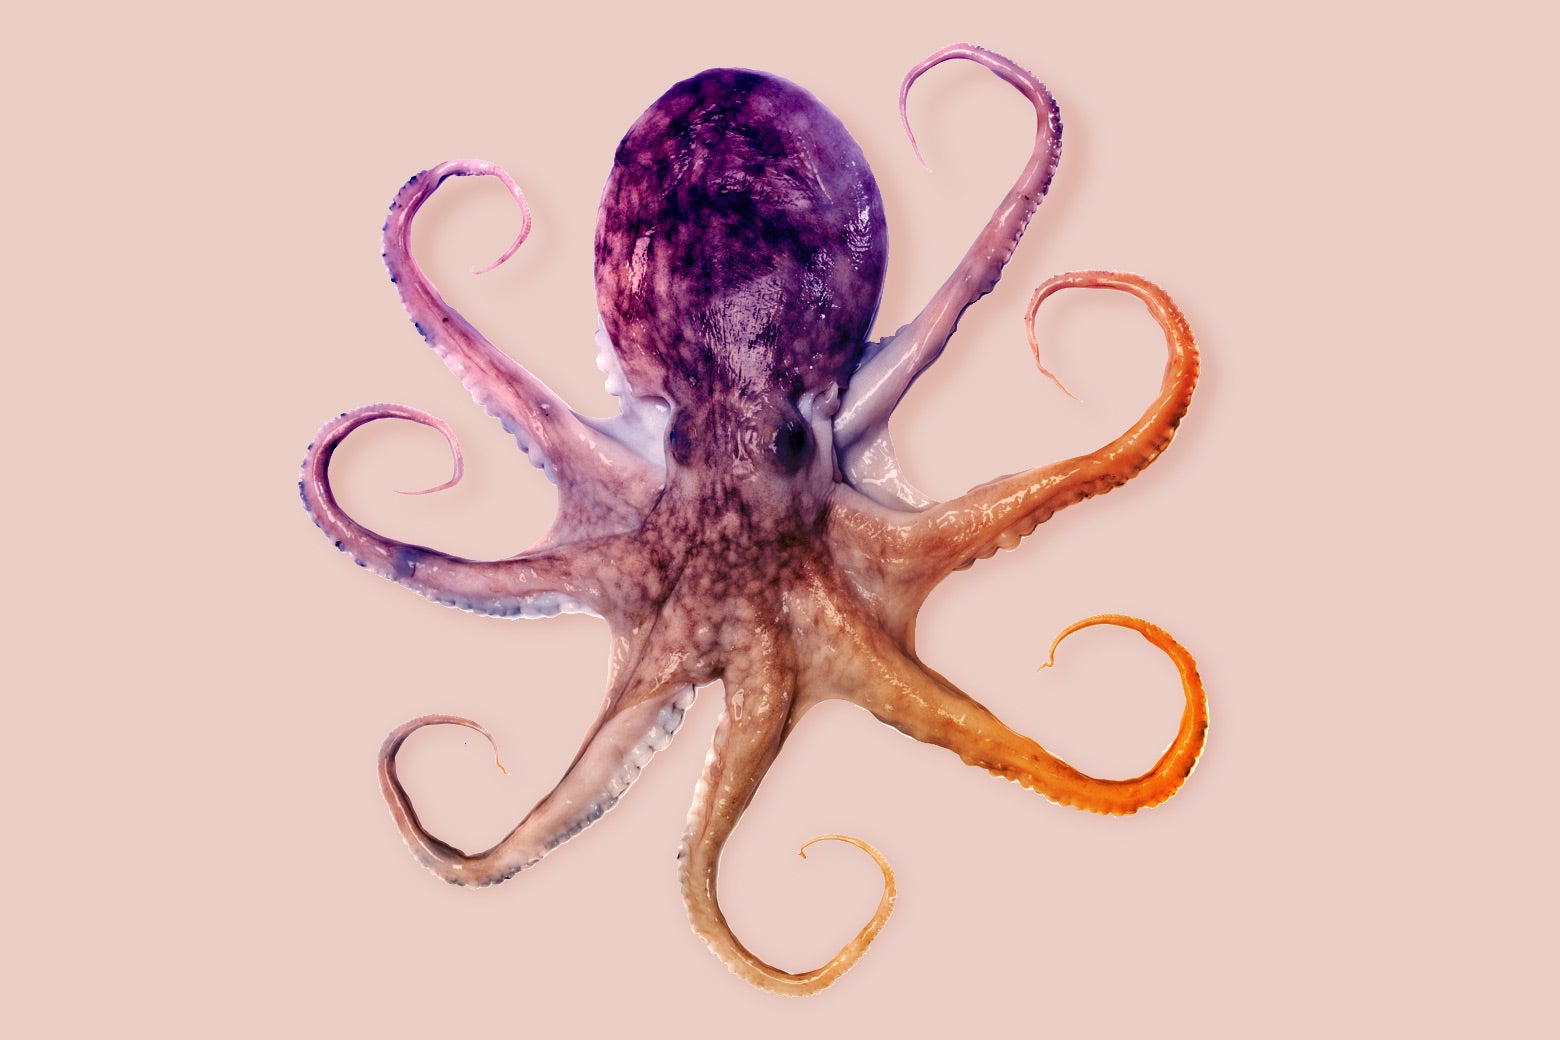 An octopus in the process of changing color